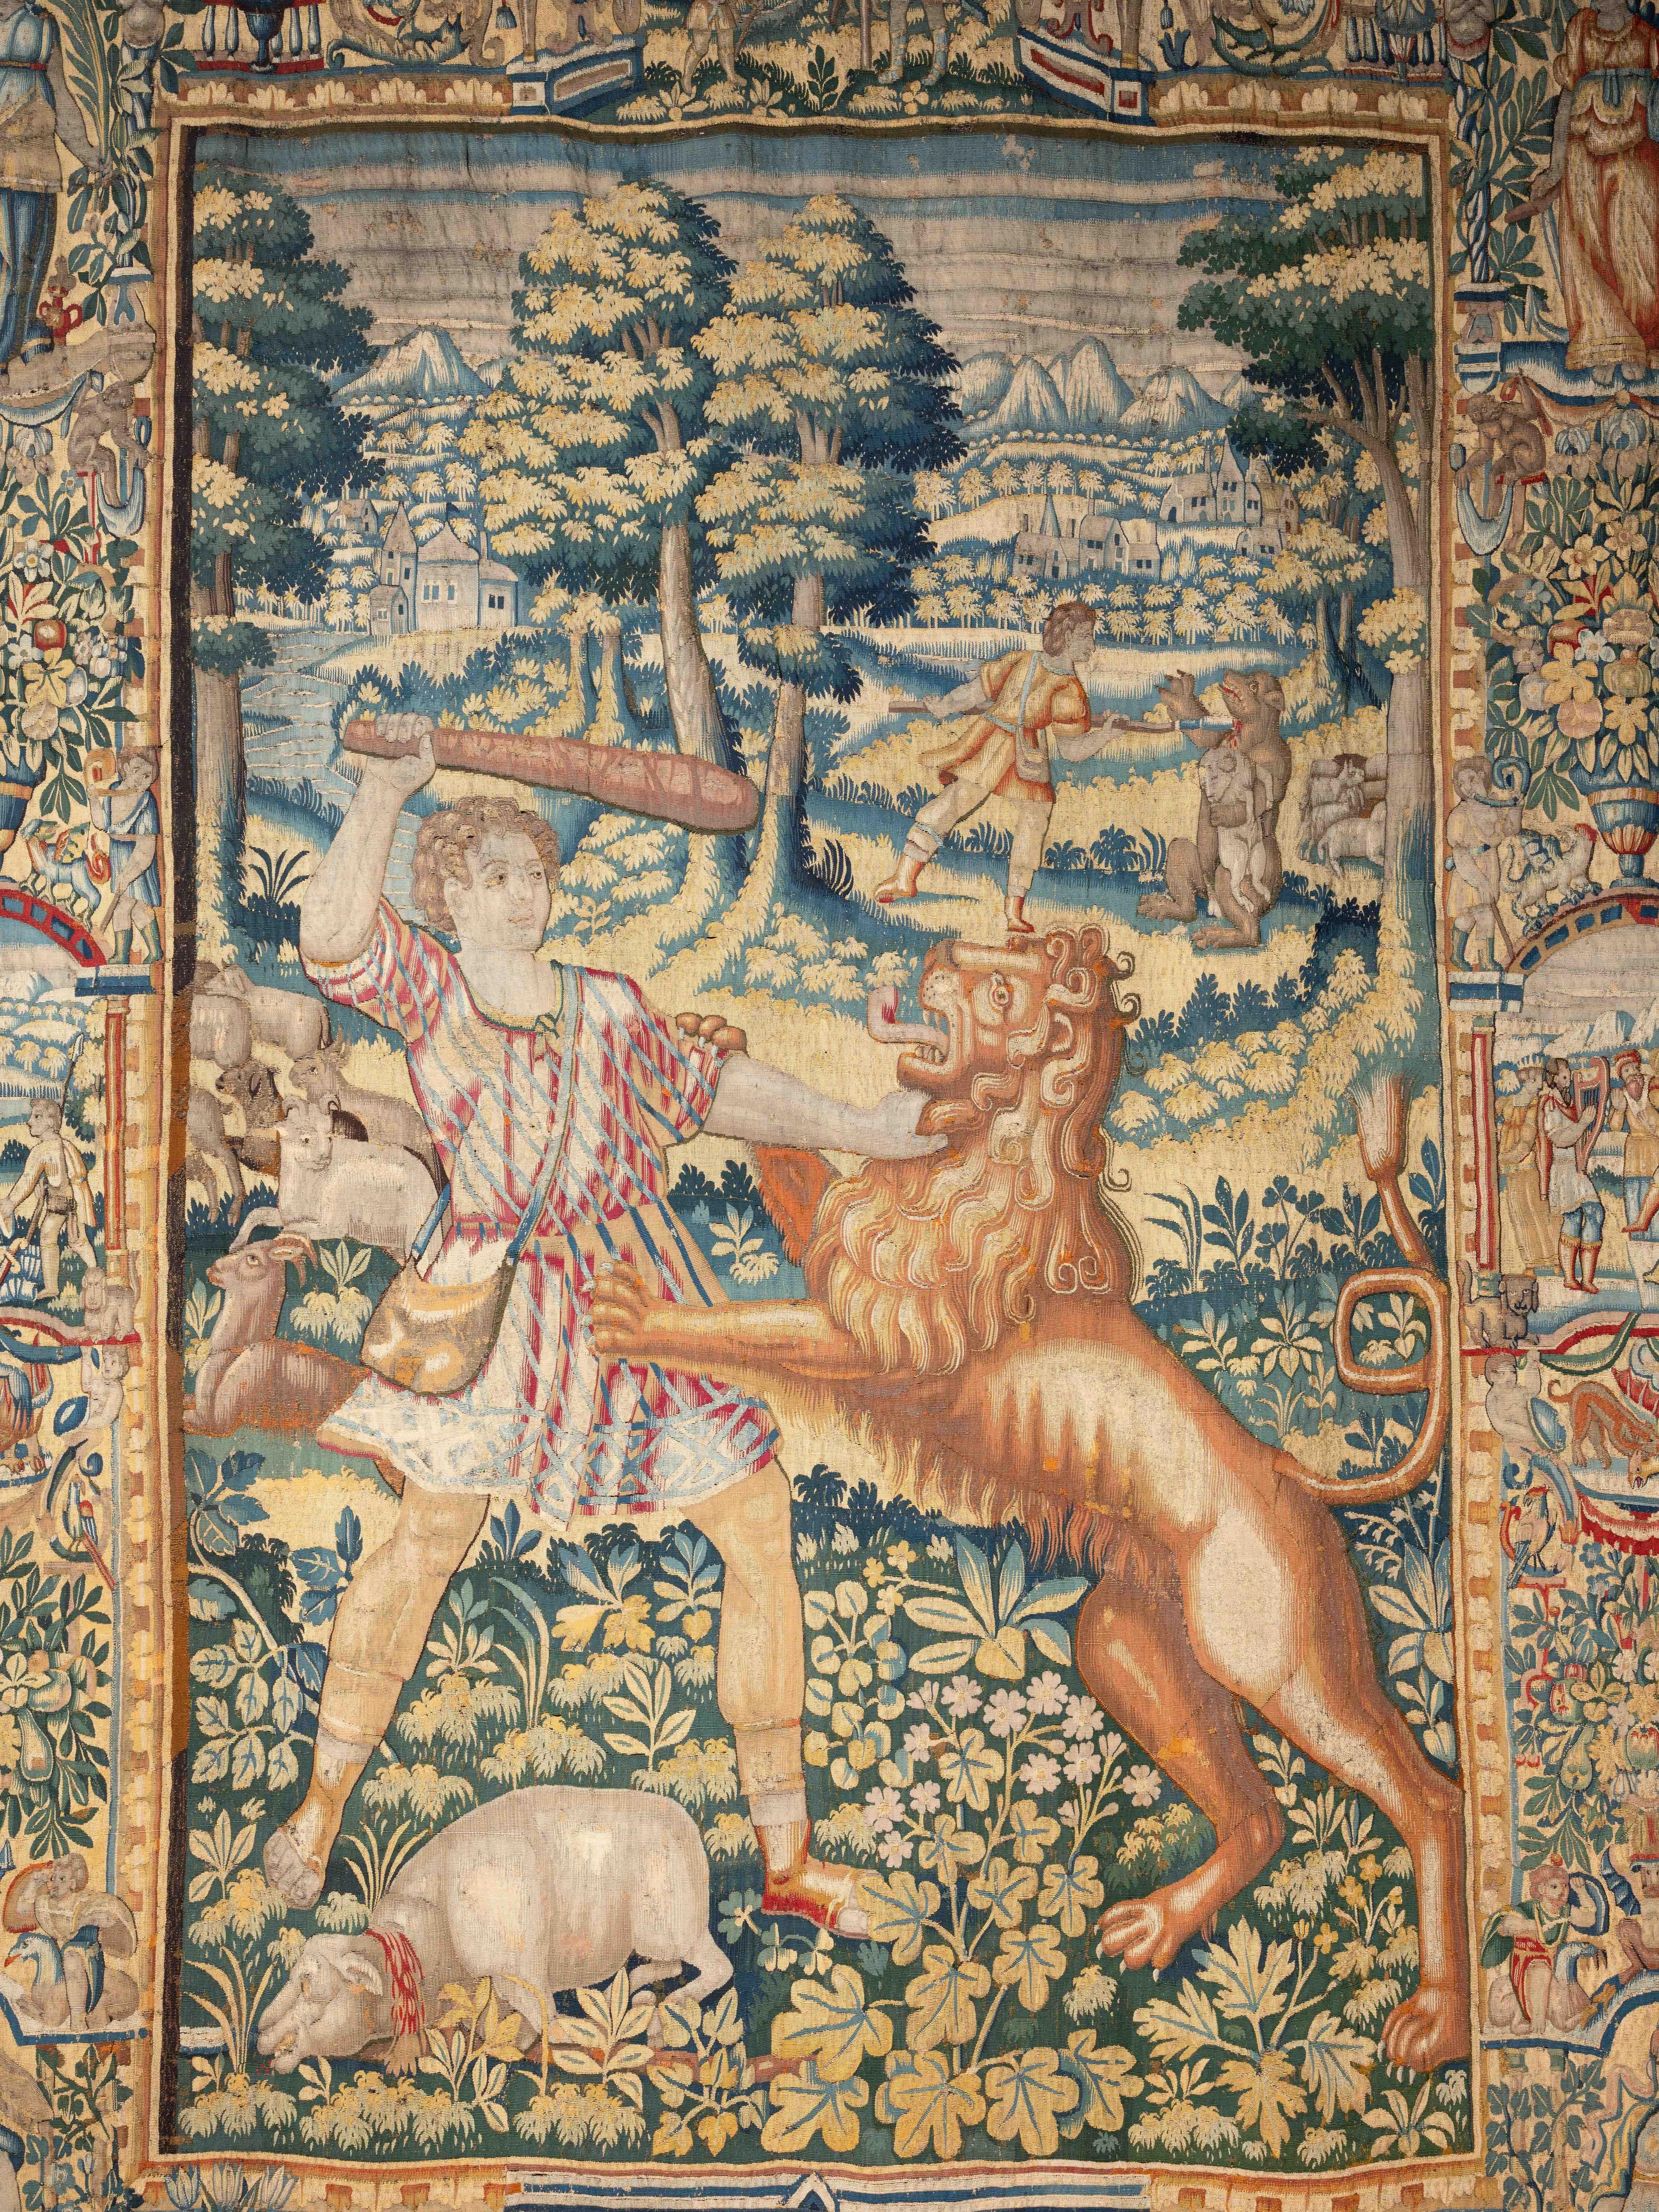 16th century Brussels tapestry
The Story of David
Brabant, 16th Century
Monogram at the bottom left.
320 x 250 cm

This splendid Brussels tapestry, crafted from wool and silk during the 16th century, bears the monogram of the weaver's workshop at